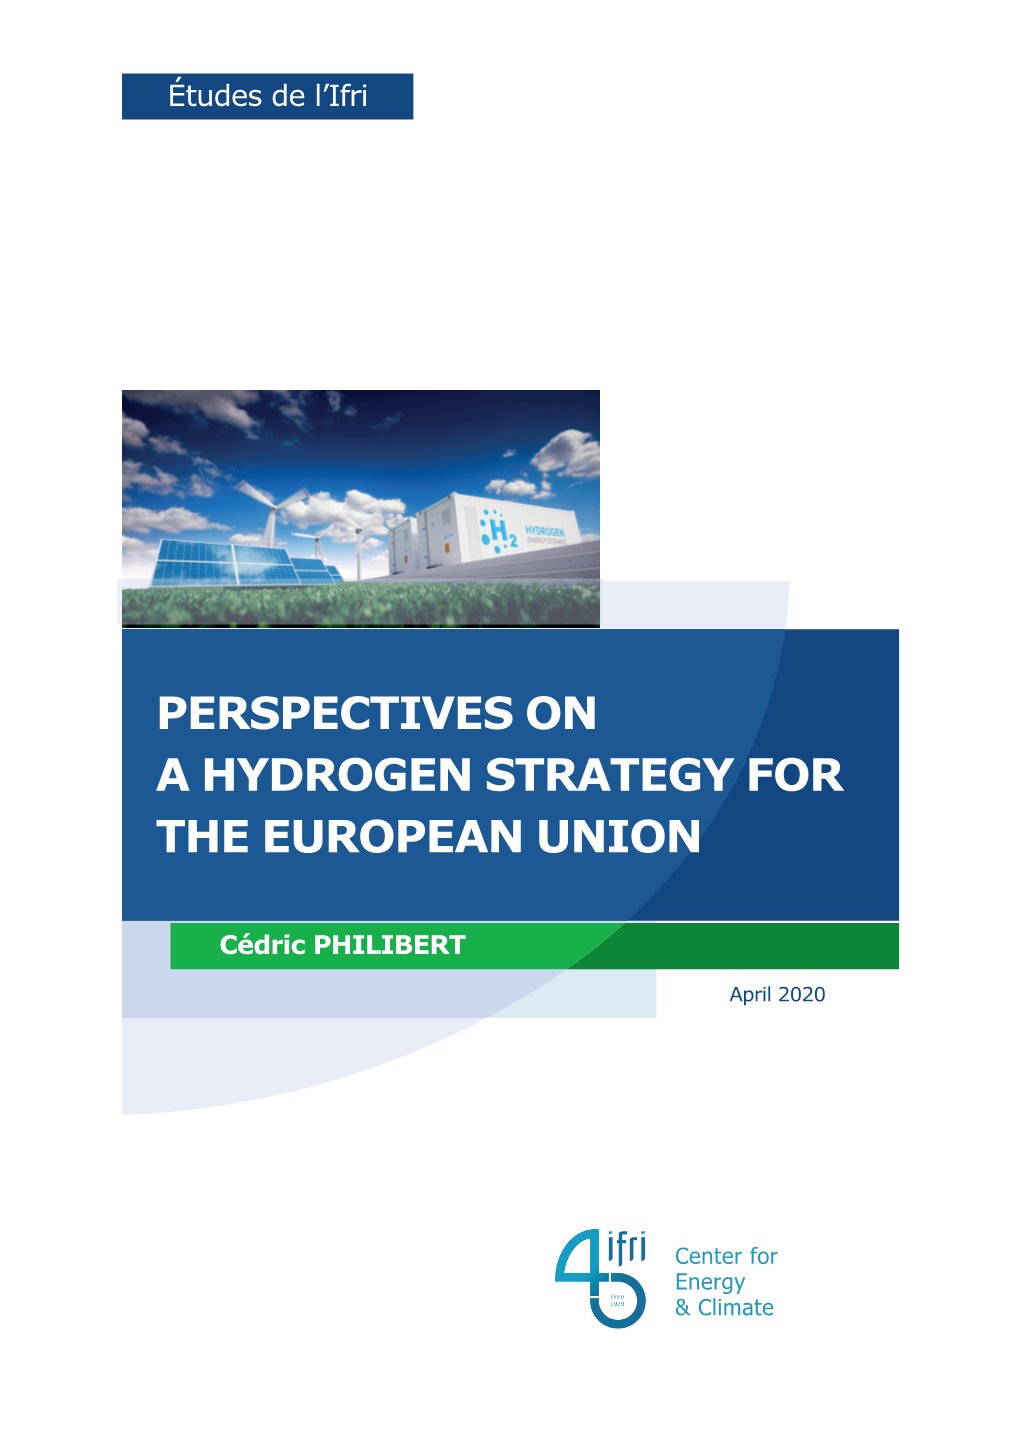 Perspectives on a Hydrogen Strategy for the European Union